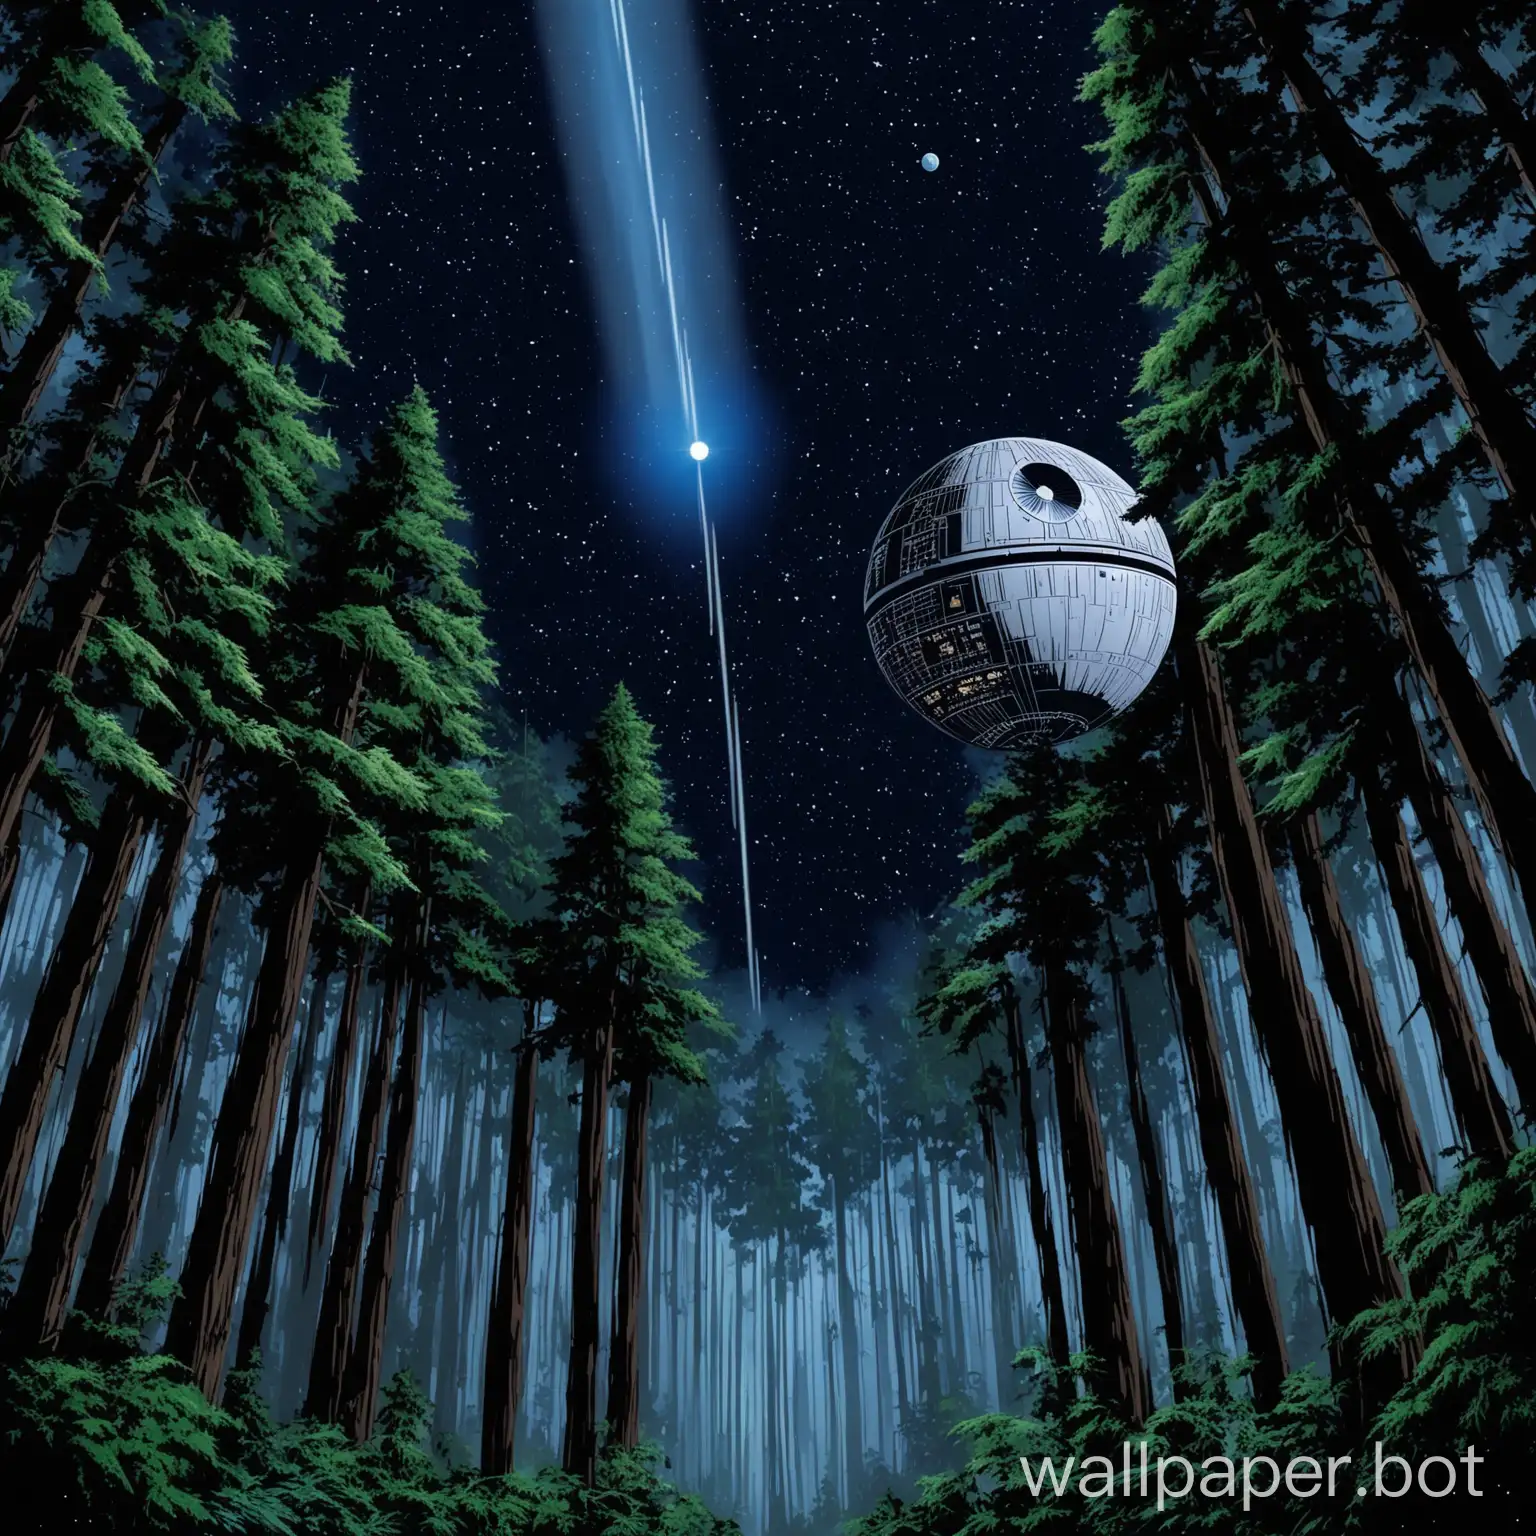 Star Wars in the woods of endor looking up in the night sky to reveal the death star